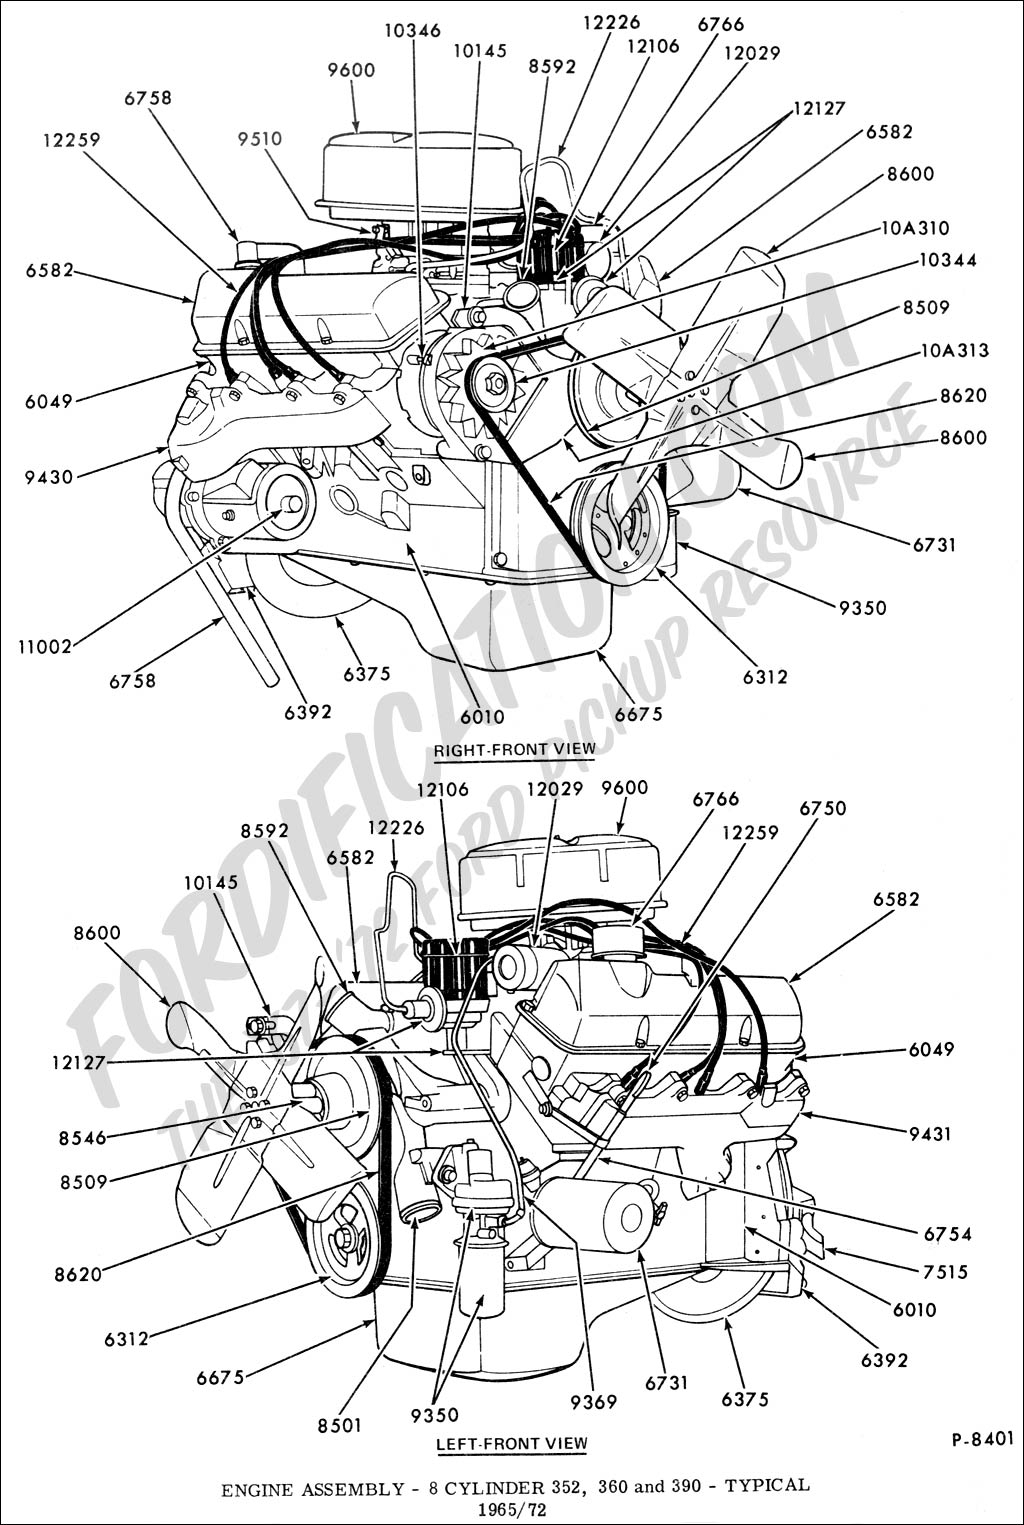 Ford Truck Technical Drawings And Schematics - Section E